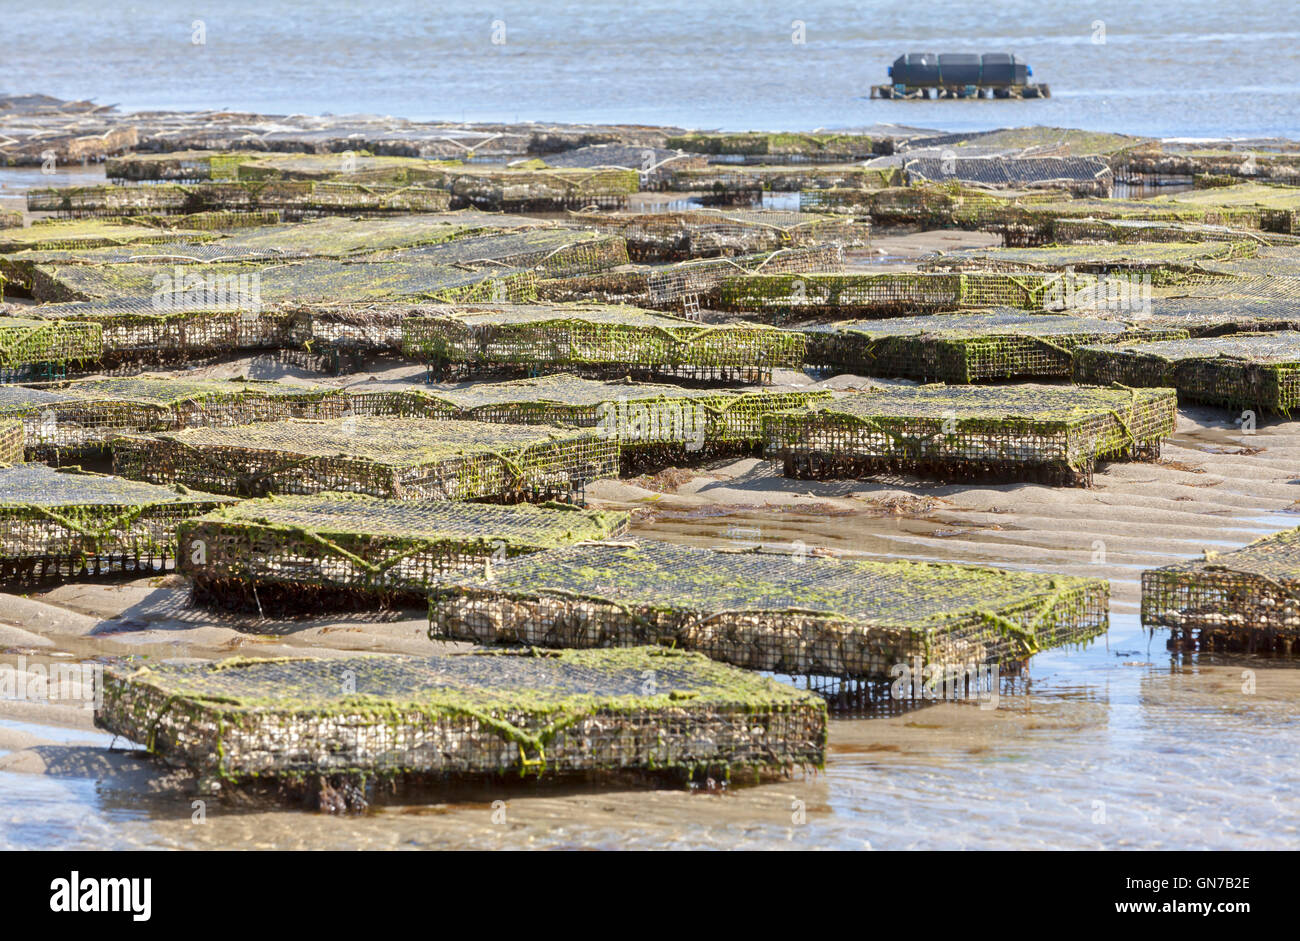 Oyster fishermen farmers growing oysters on their oyster farm in the baskets sitting in ocean water. Stock Photo